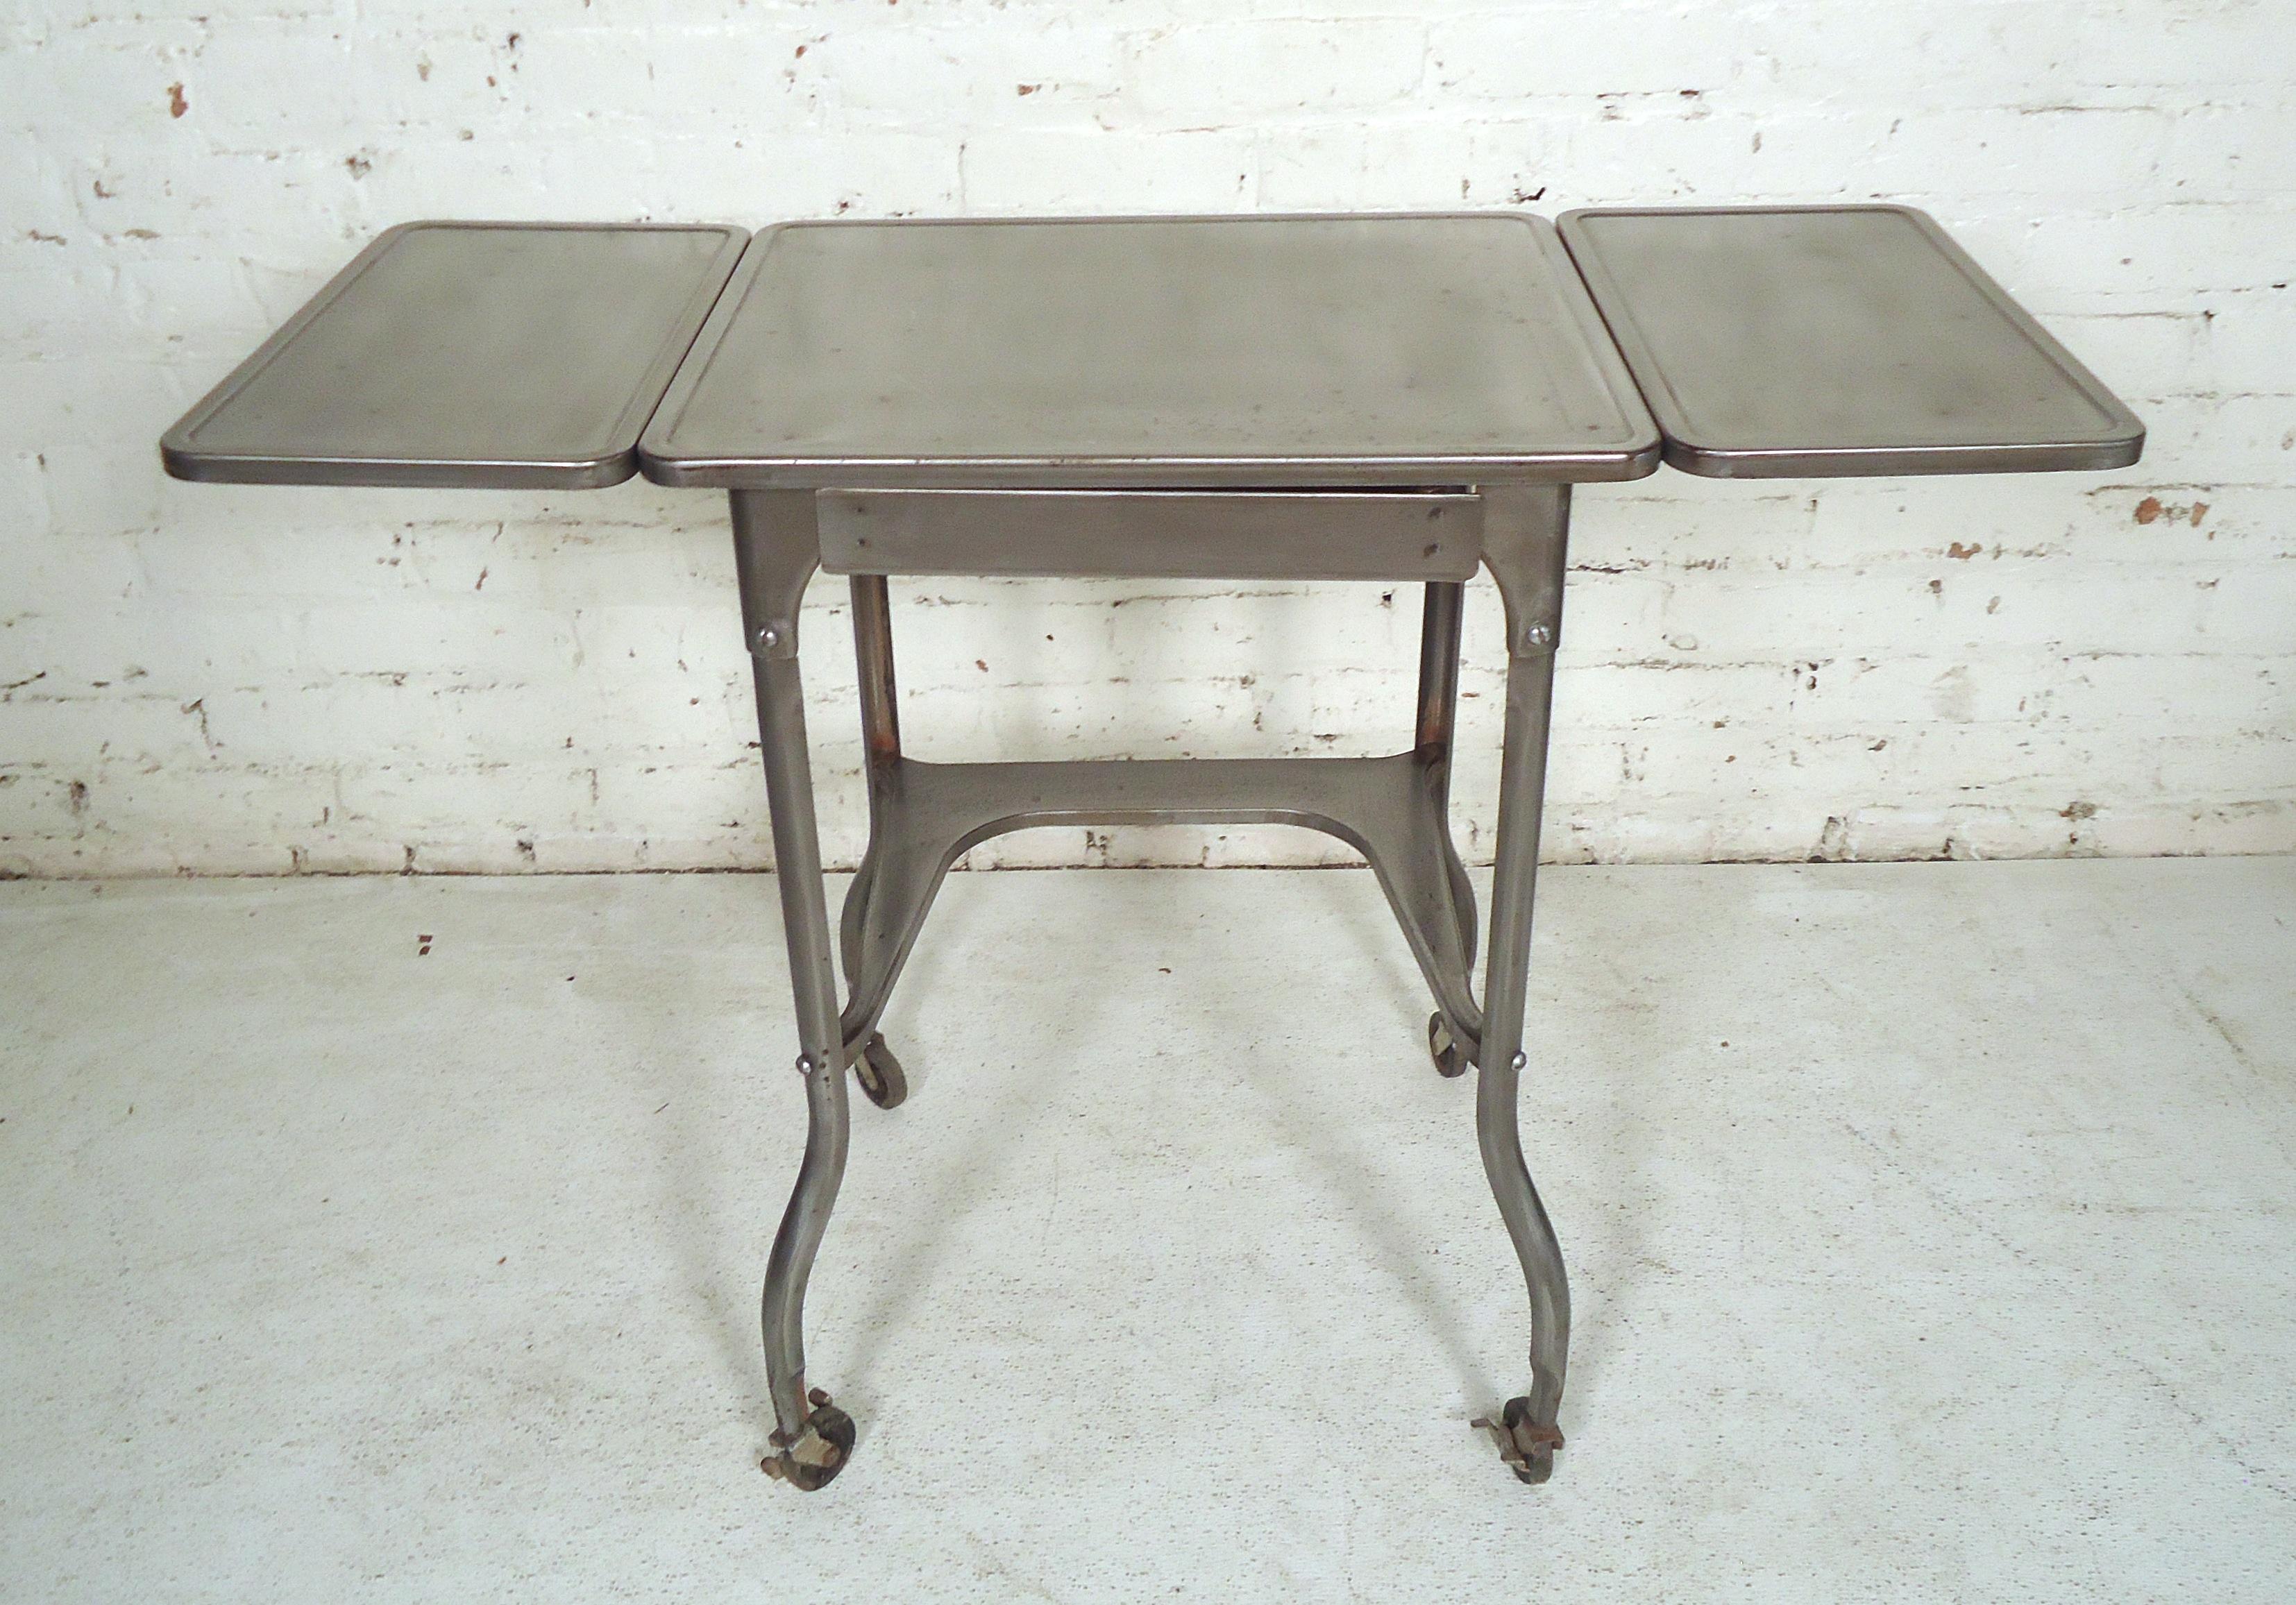 Small side table restored in a bare metal style finish. Features a pair of drop leaf extensions.
(Please confirm item location NY or NJ with dealer).